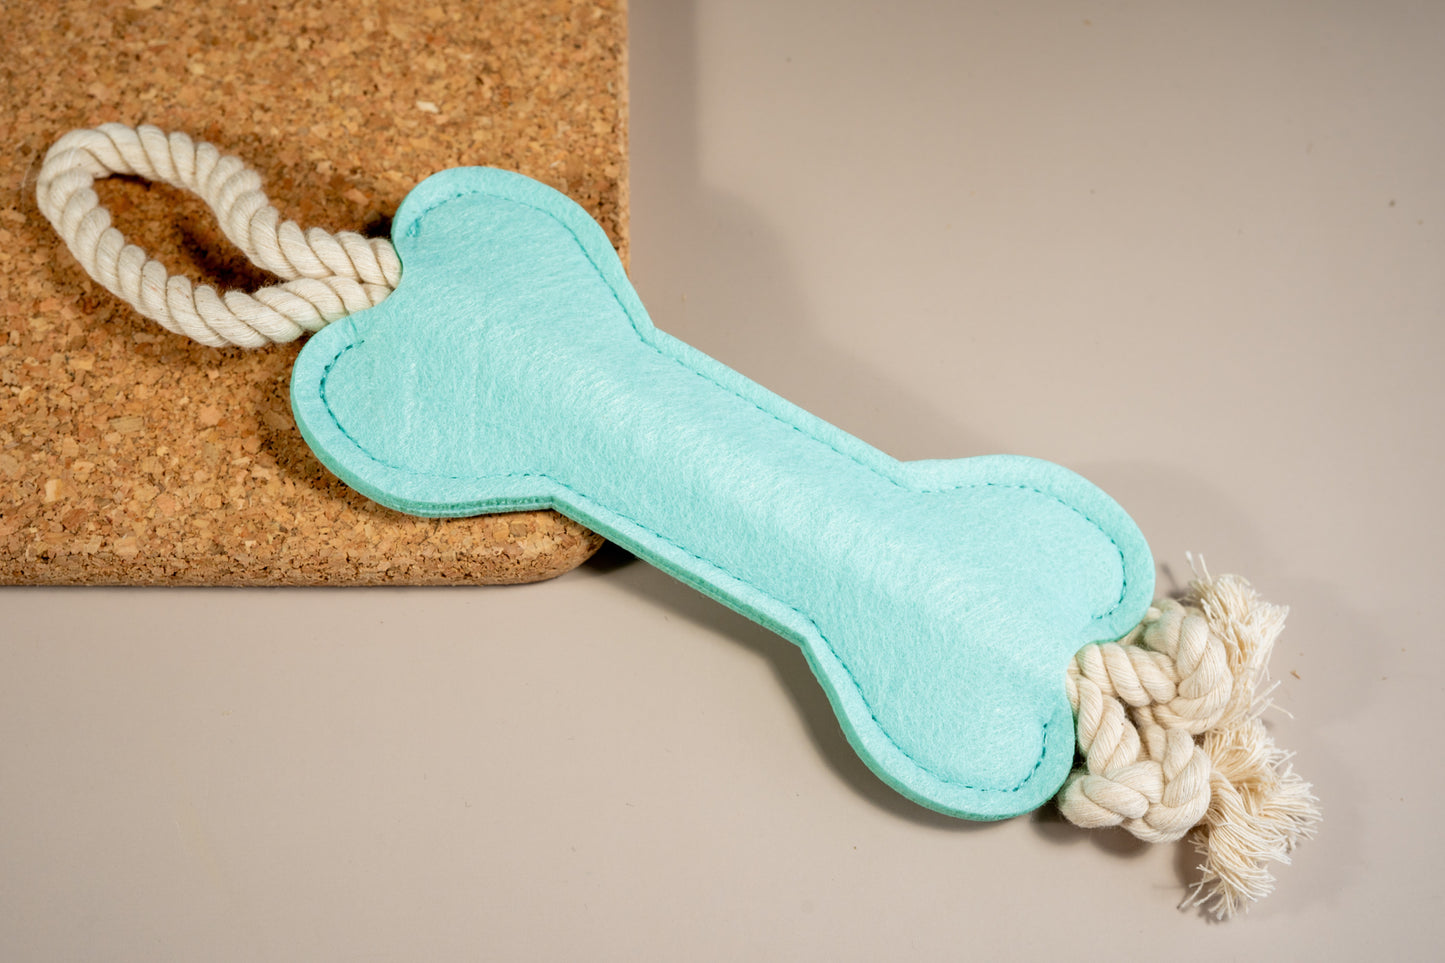 Powder blue felt bone dog toy with rope at the ends placed on cork board.